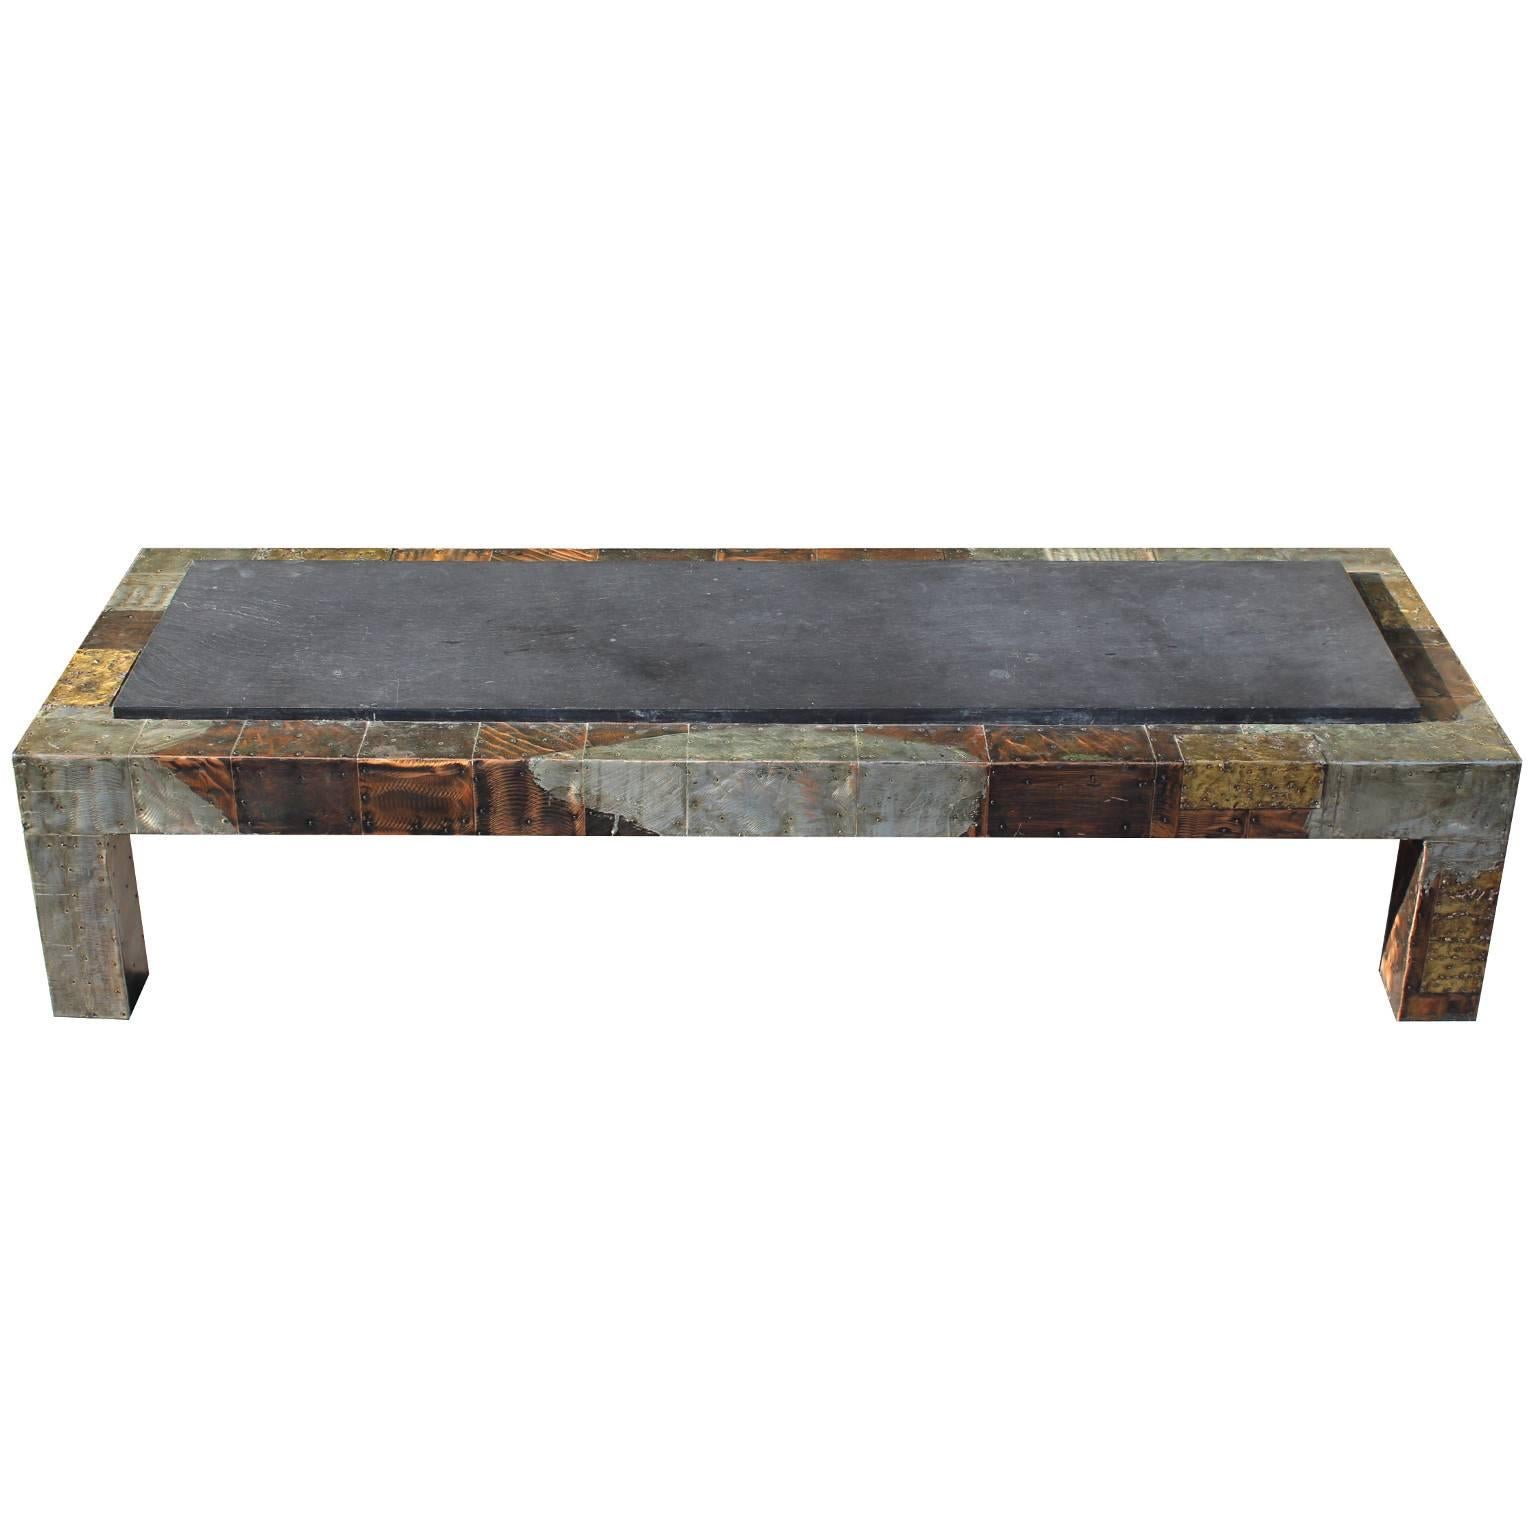 Paul Evans Mixed-Metal Patchwork Coffee Table with Slate Top 72"